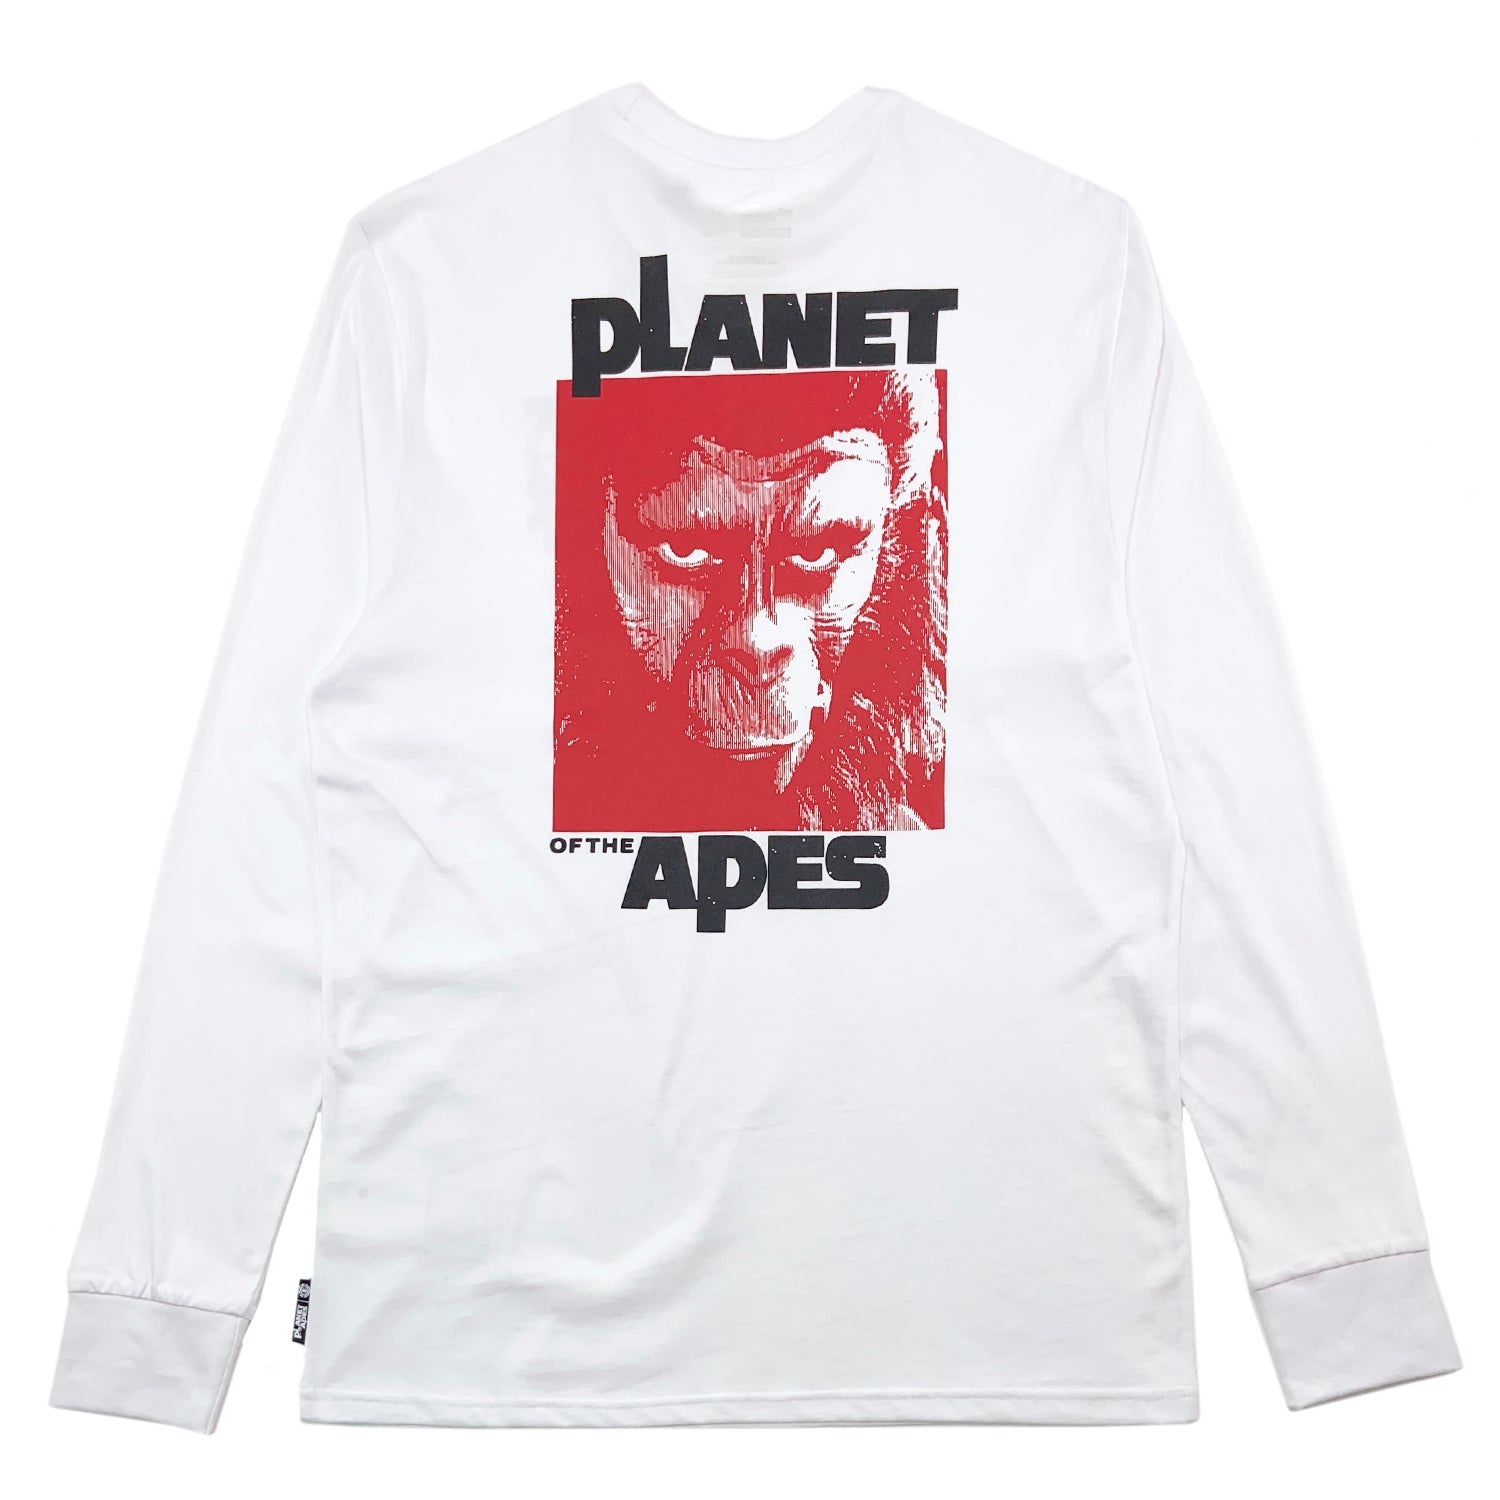 Element x Planet of the Apes - Dominion Long Sleeve T-shirt - Prime Delux Store